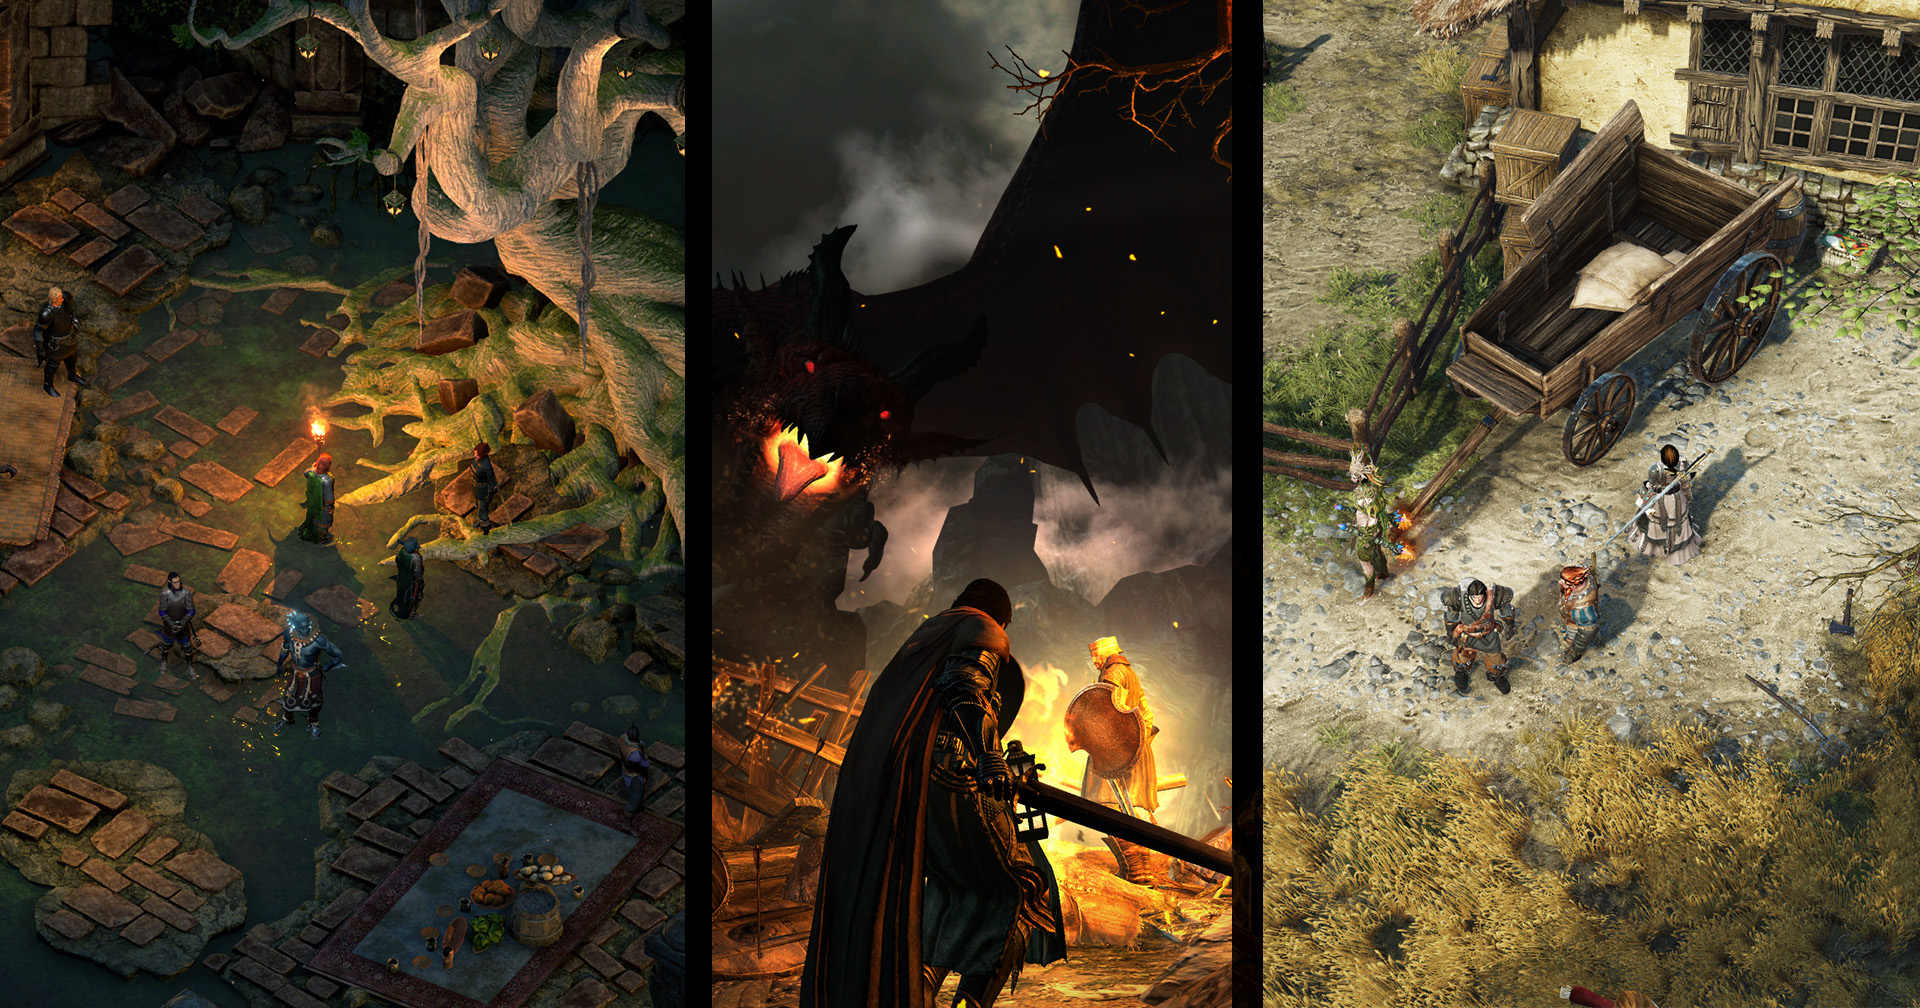 We see a collage of three screenshots arranged in parallel from different games like Baldur's Gate.